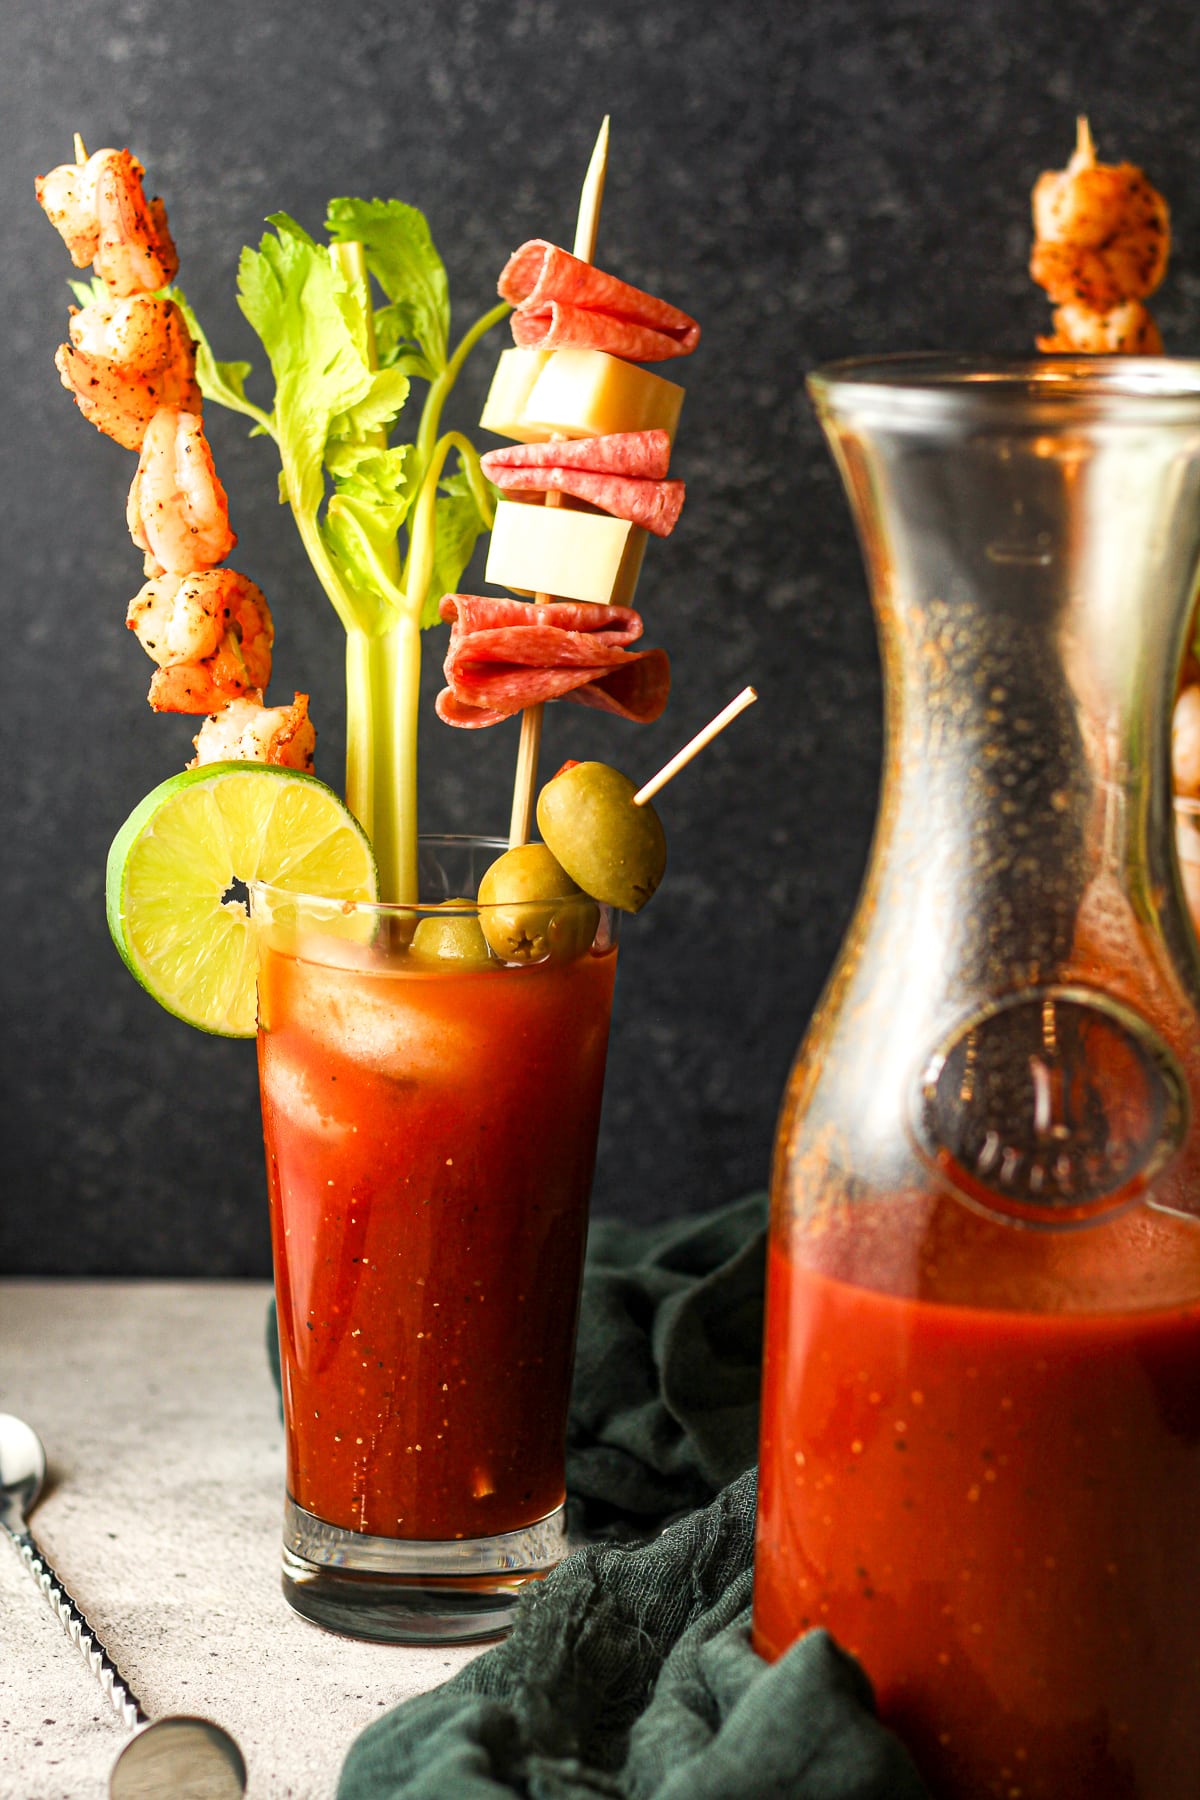 Side view of a spicy Bloody Mary drink with garnishes.